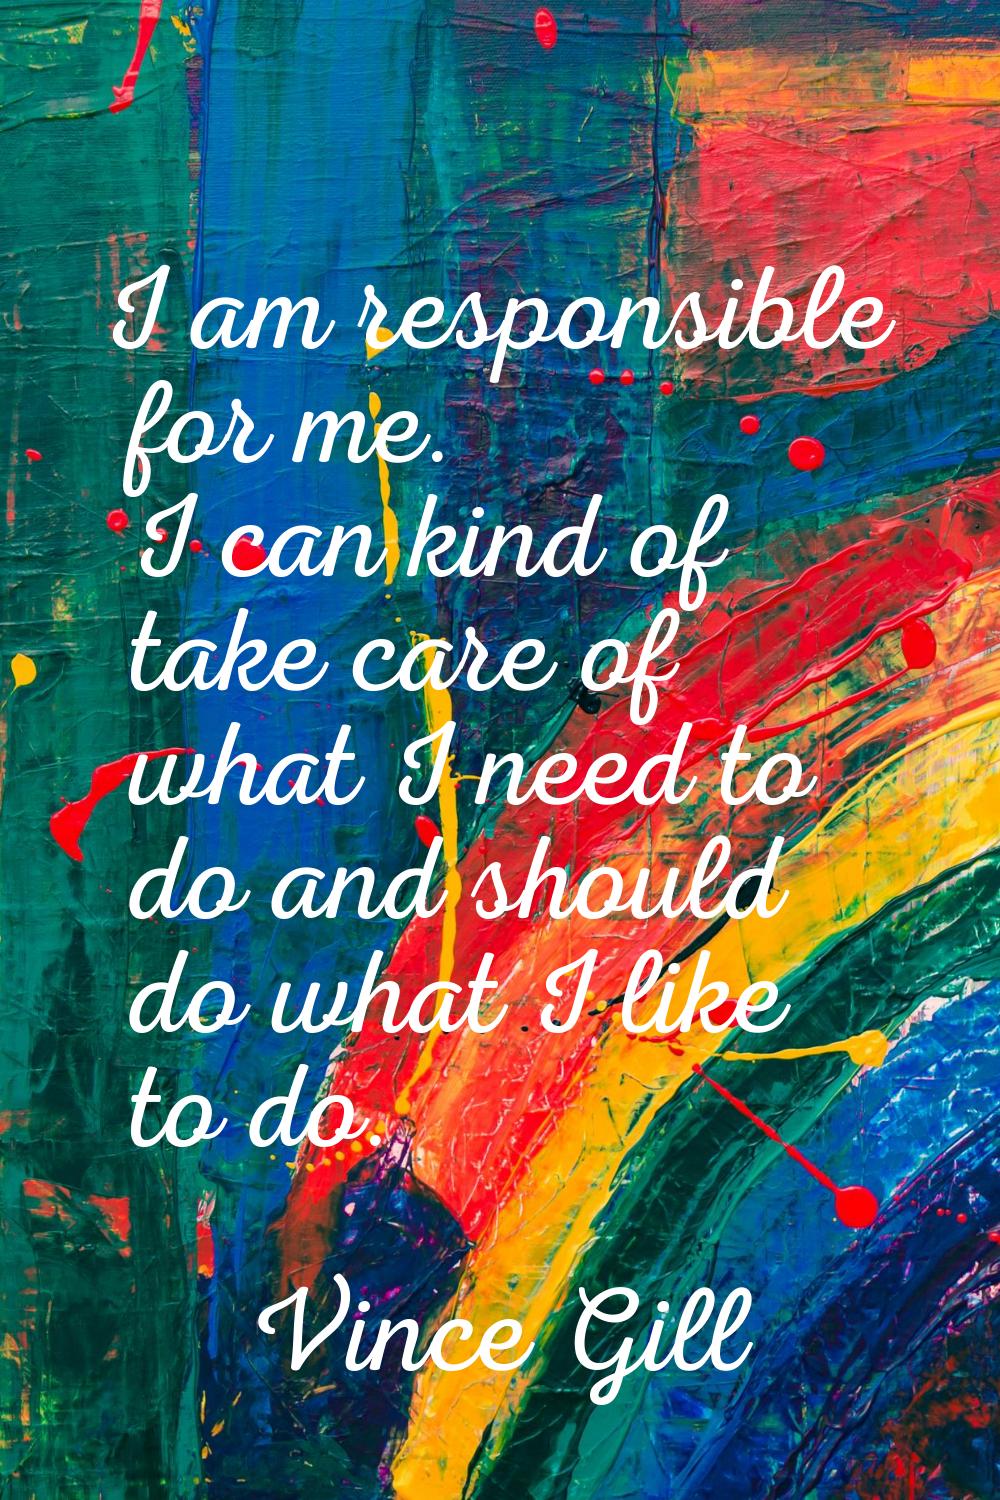 I am responsible for me. I can kind of take care of what I need to do and should do what I like to 